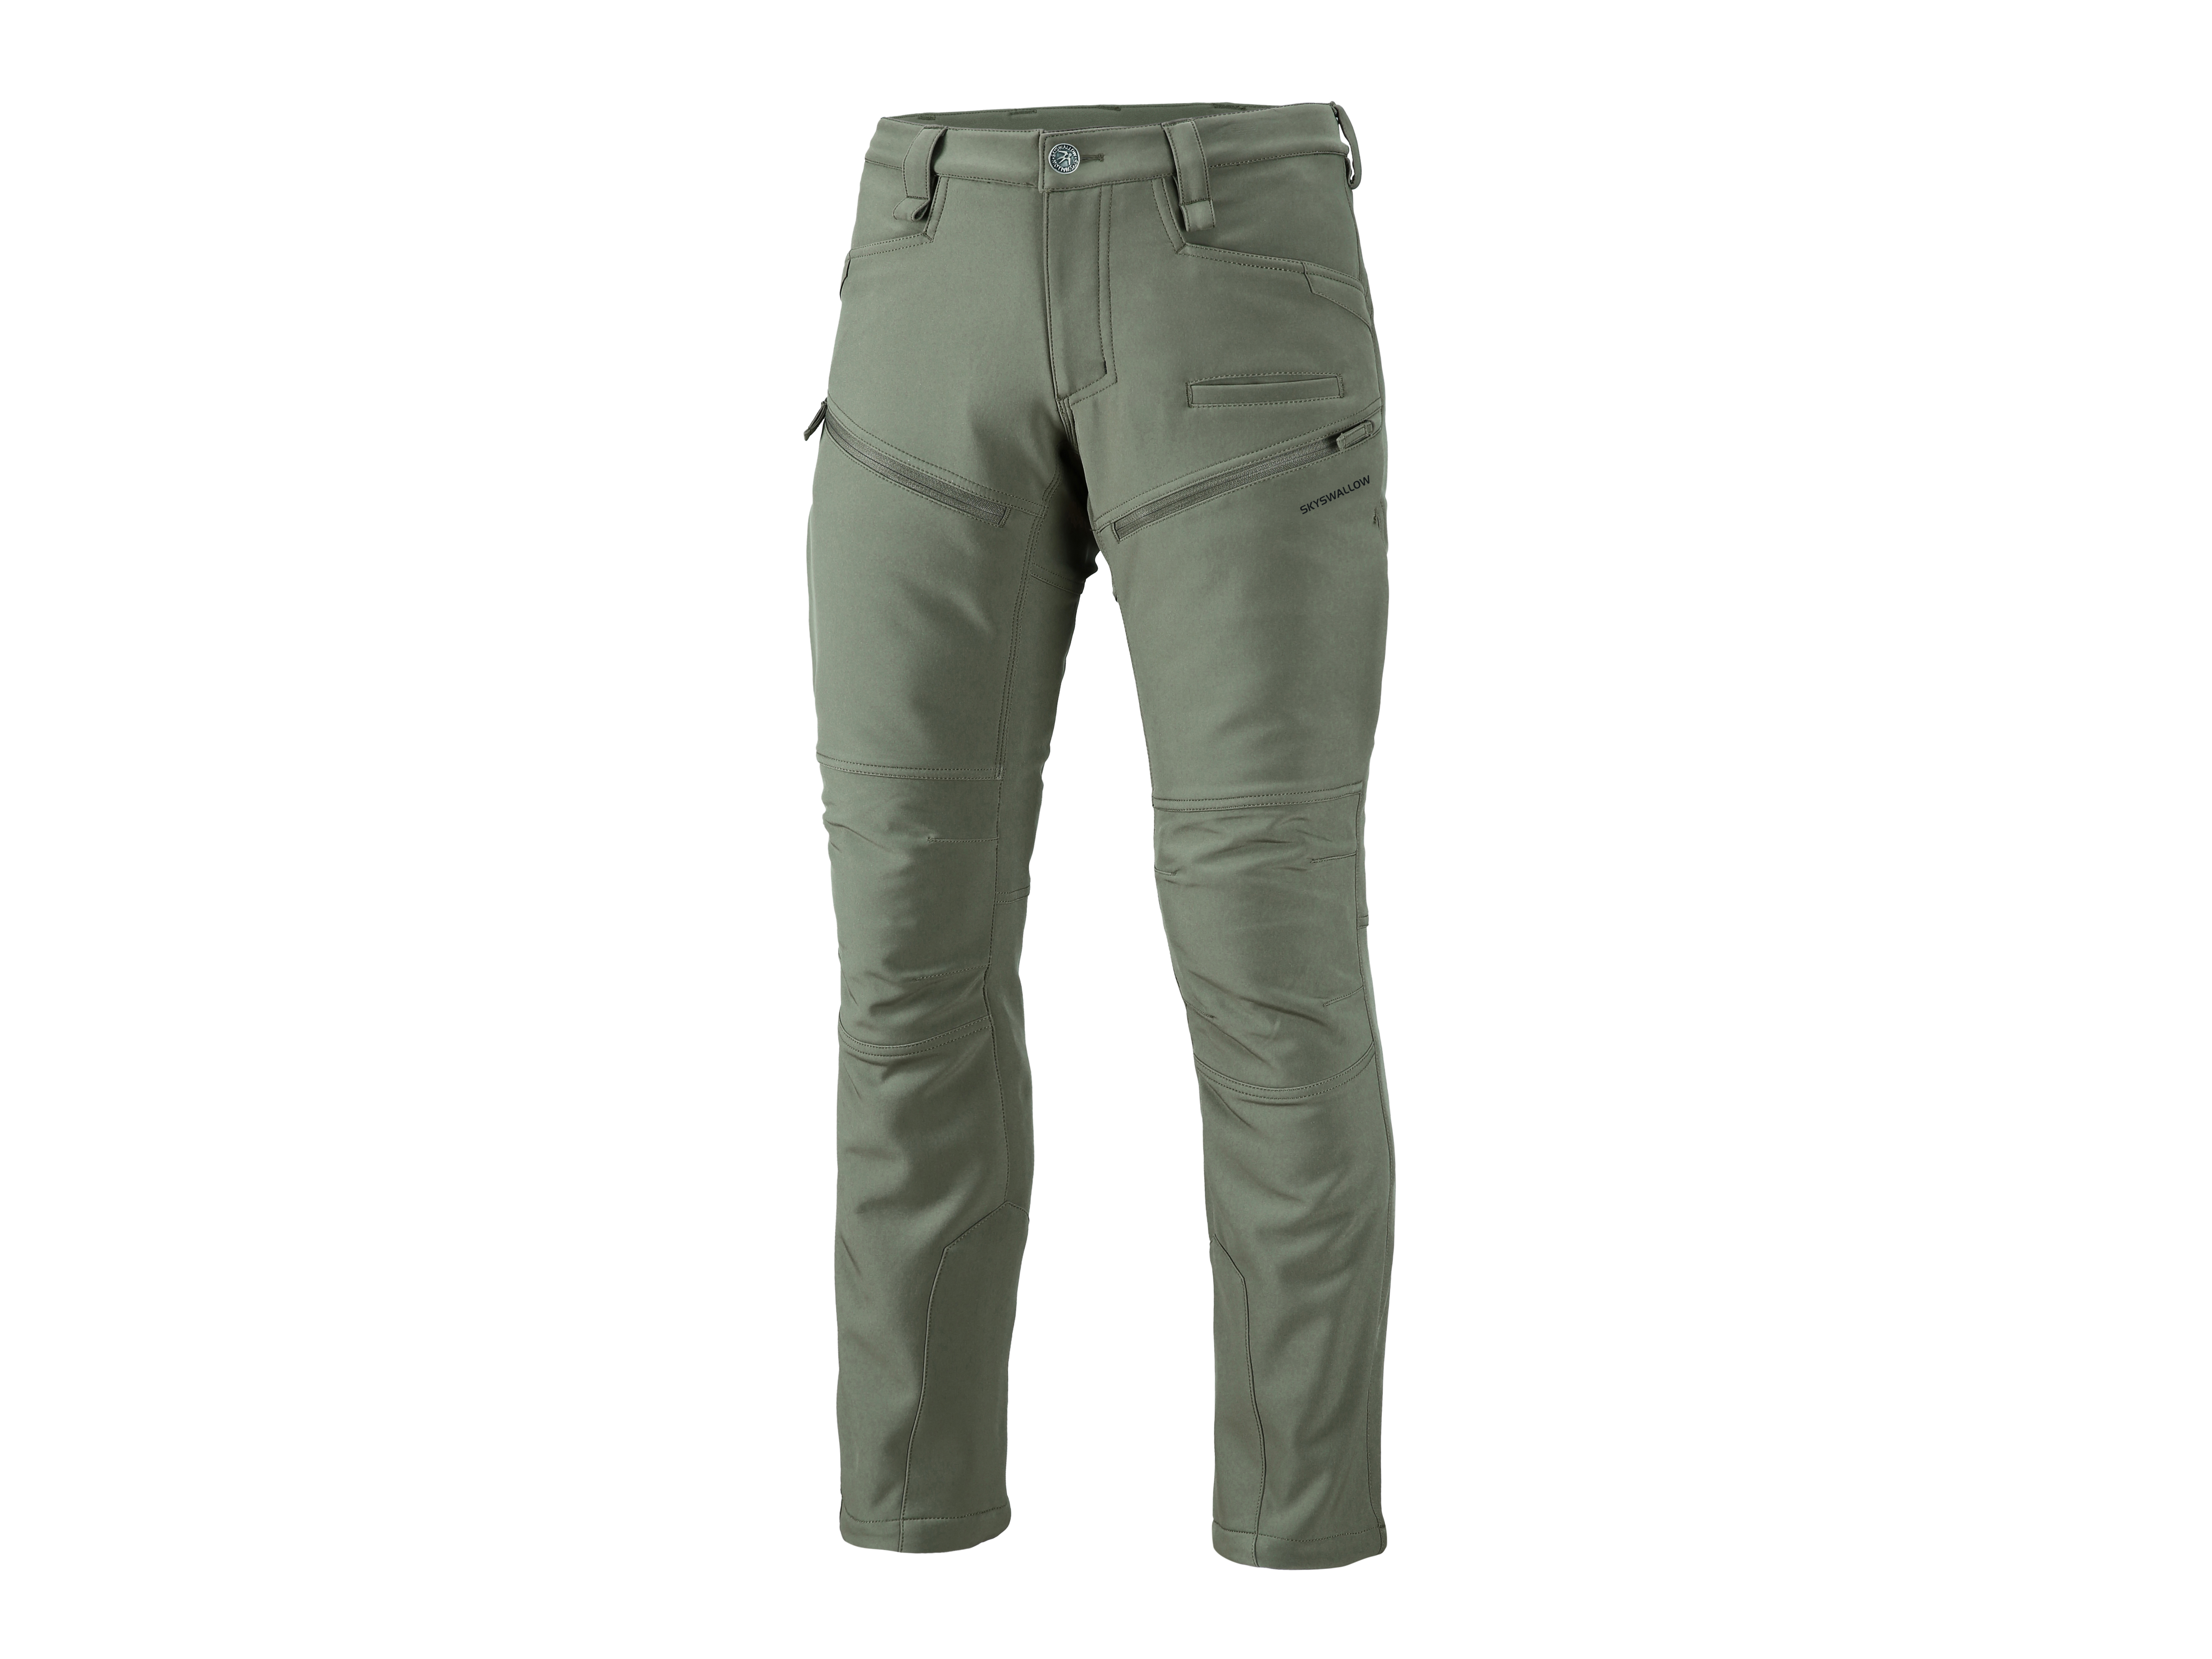 Outdoor Sports Pants: Durability Meets Functionality